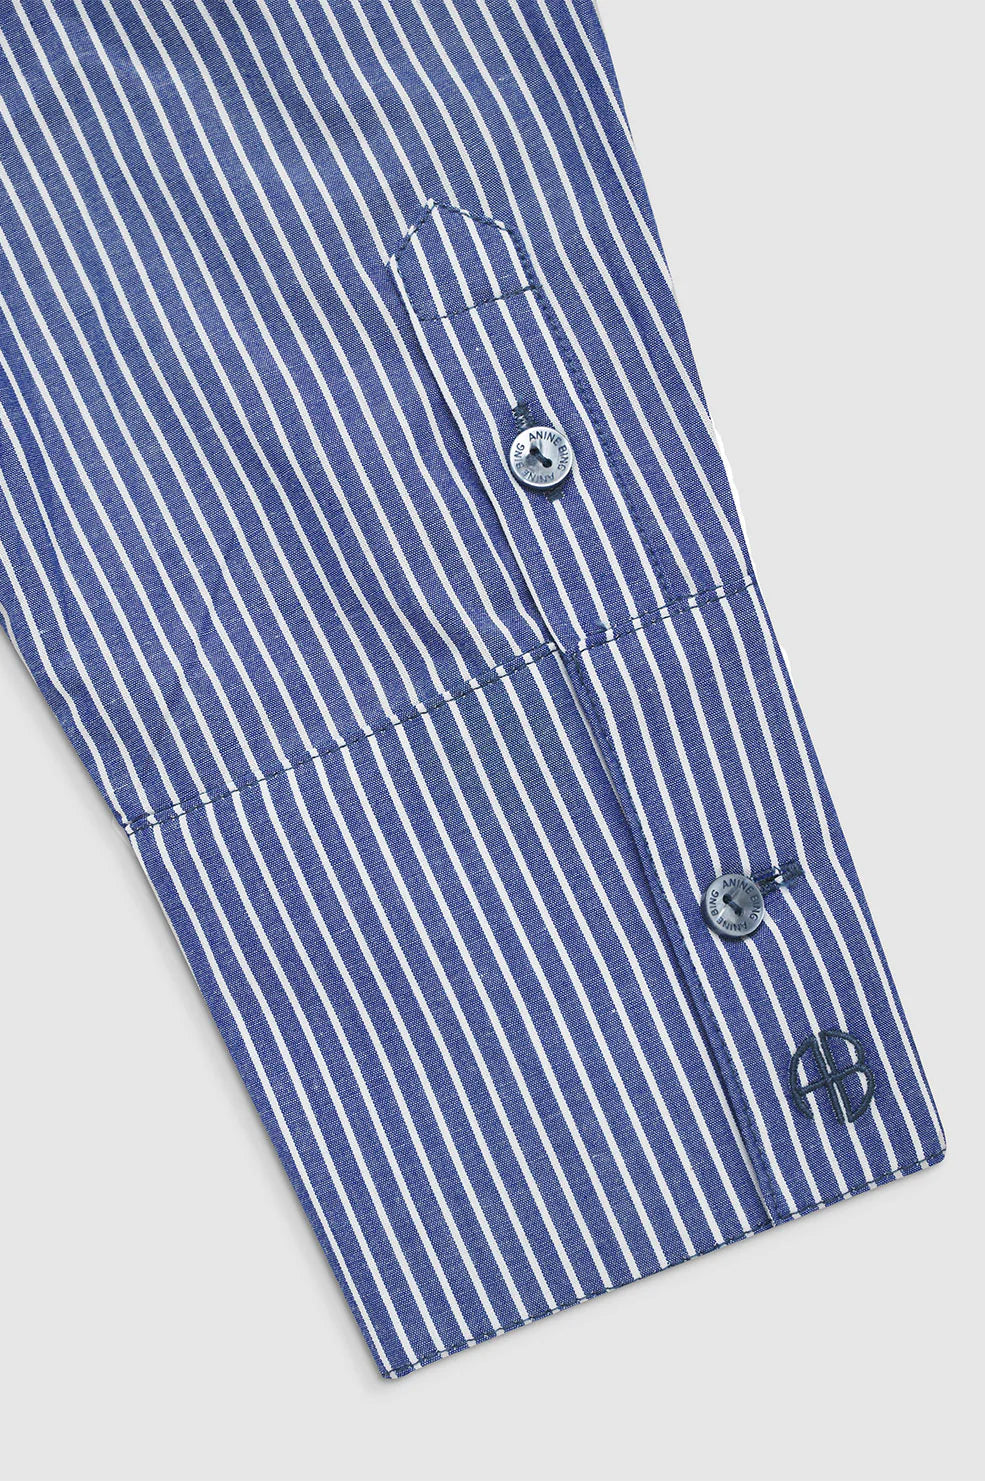 CAMISA Anine Bing AW23 Mika stripes white and blue